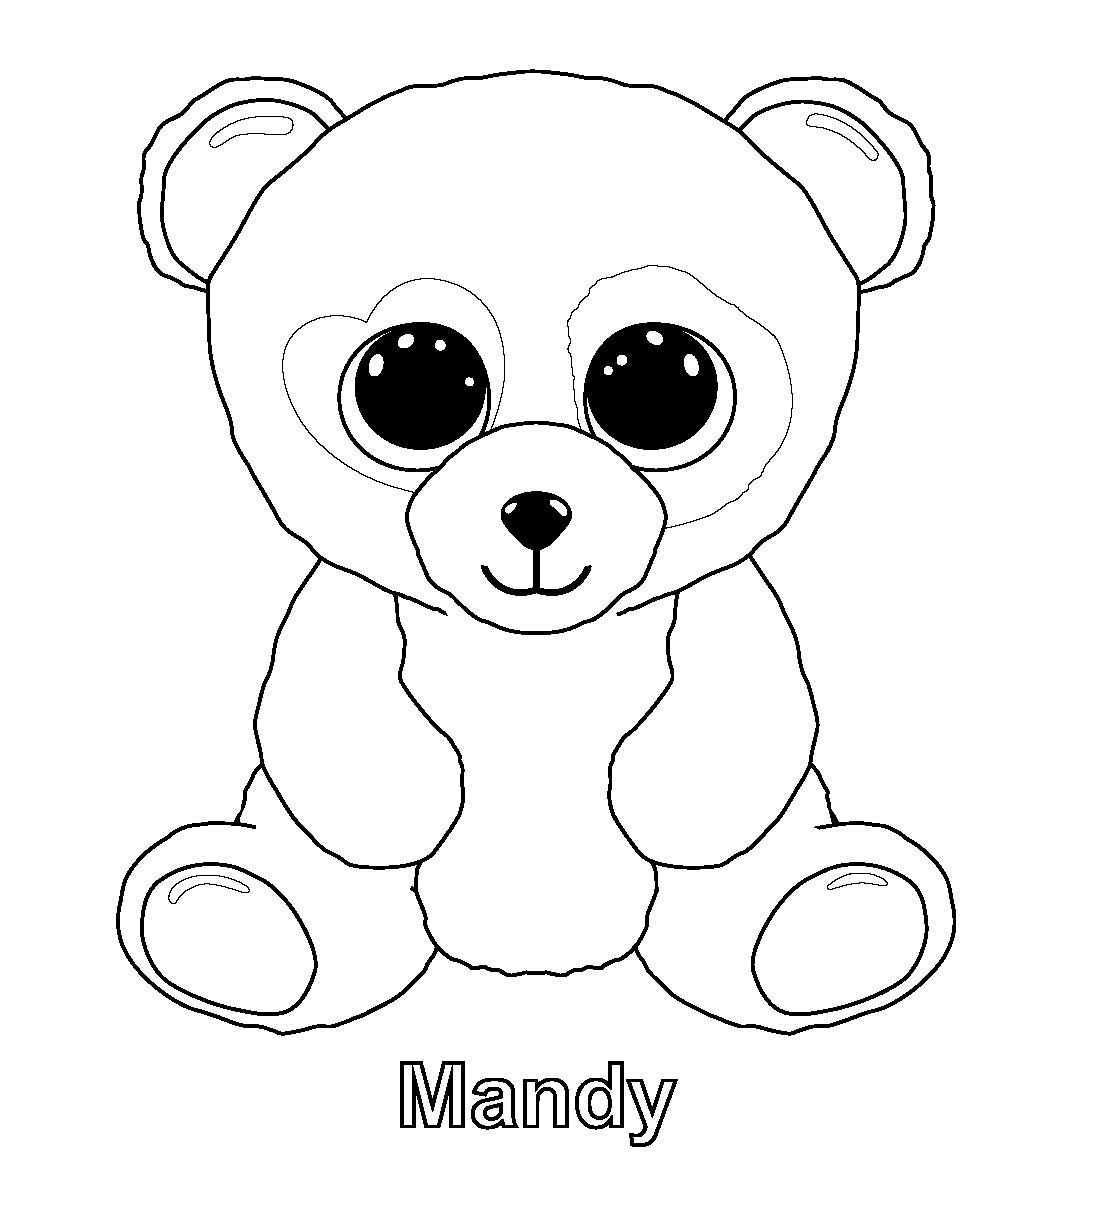 Ty Beanie Boos Coloring Pages Panda Coloring Pages Beanie Boo Birthdays Beanie Boo